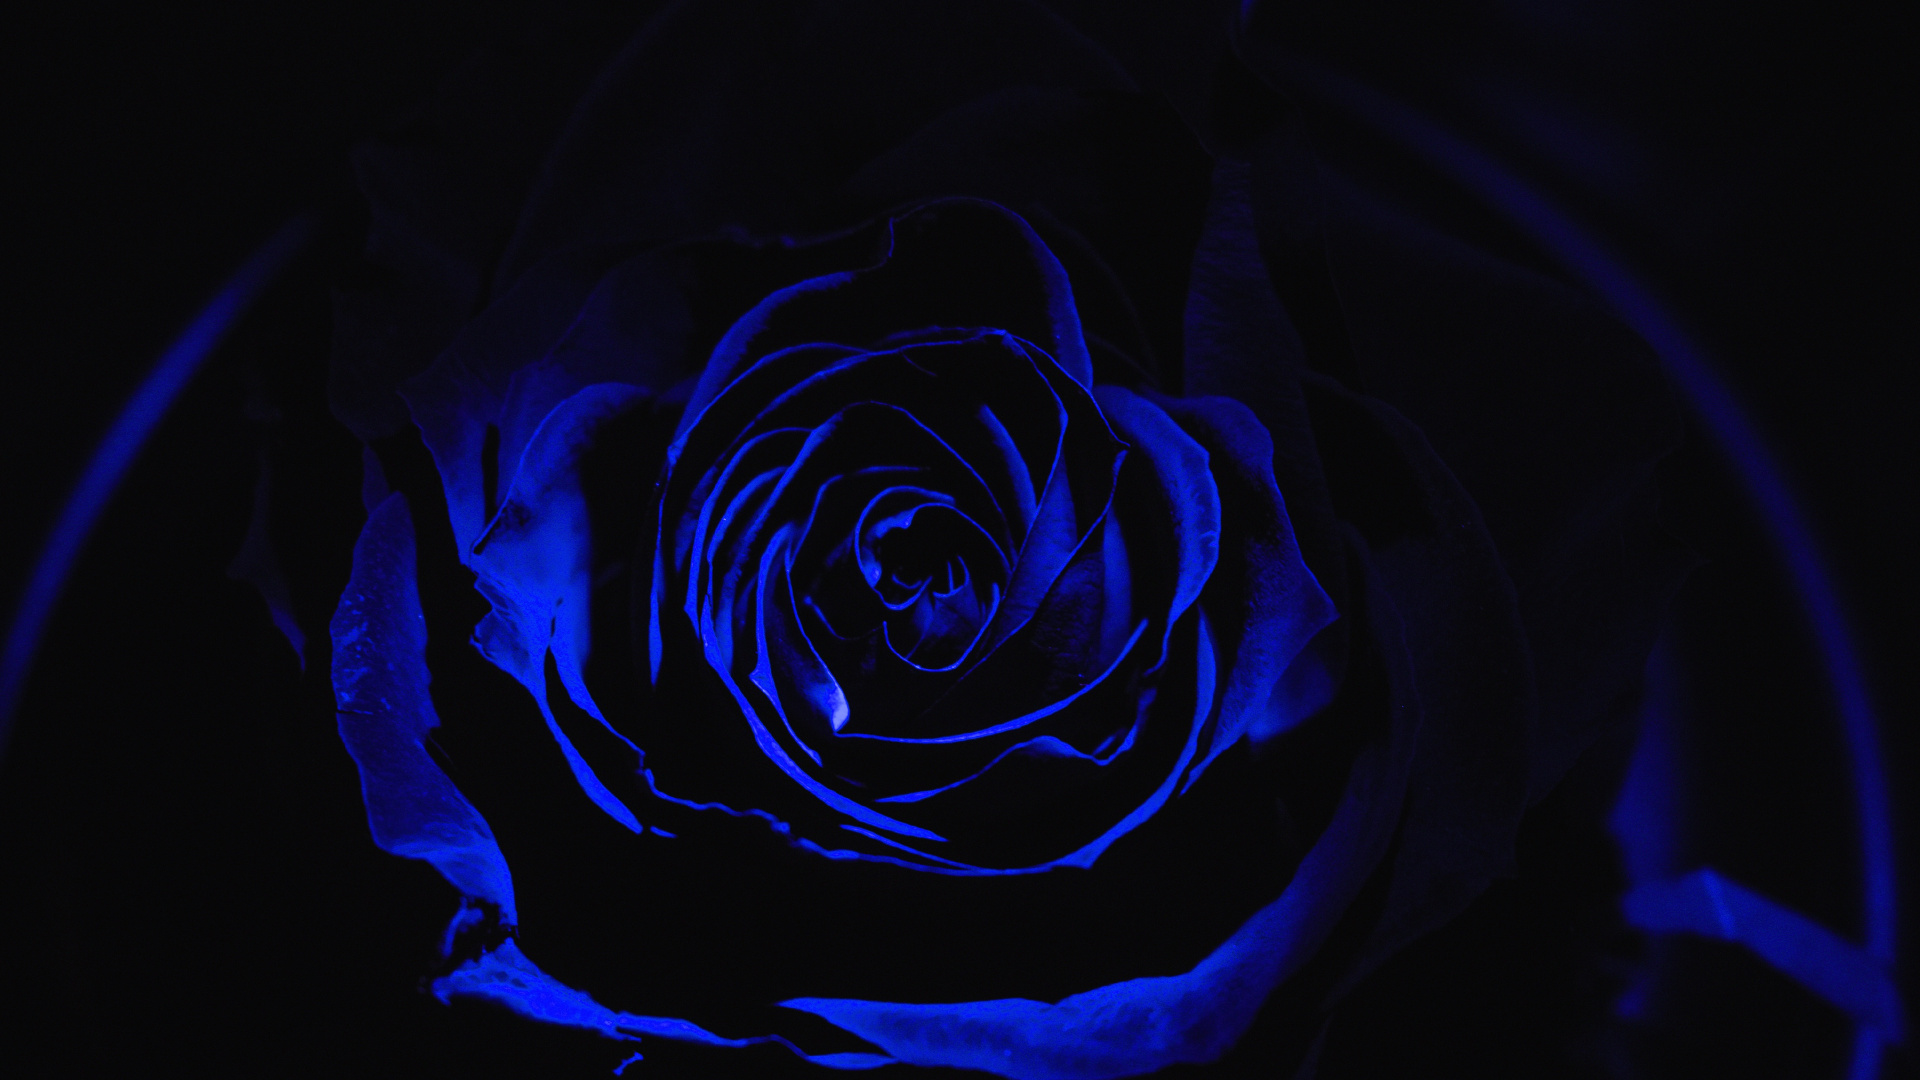 Blue Rose in Close up Photography. Wallpaper in 1920x1080 Resolution